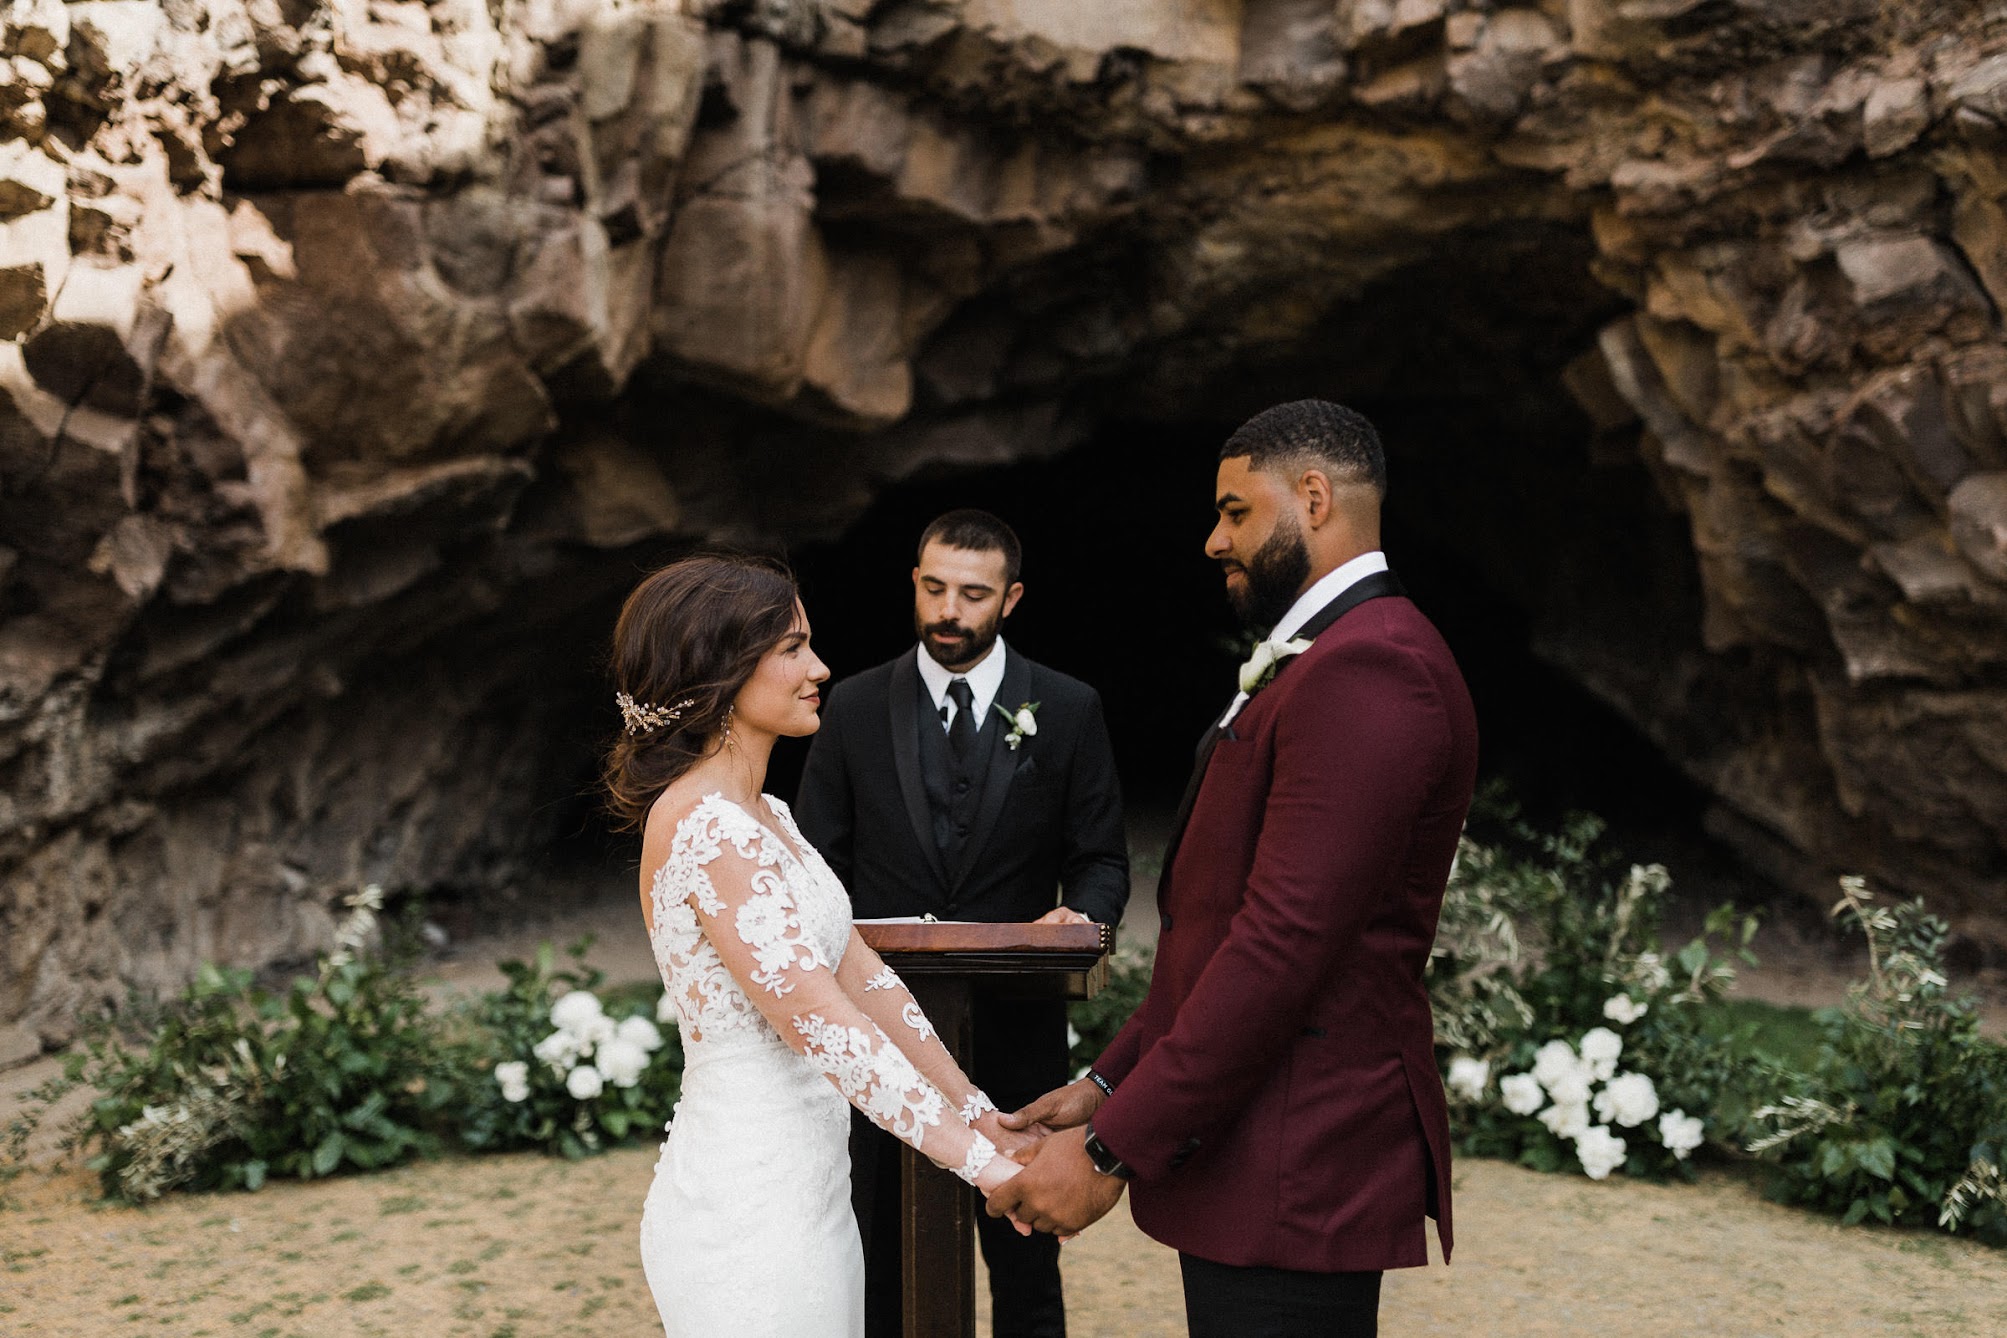 the couple looking deeply into each others eyes, while the officiant speaks to them